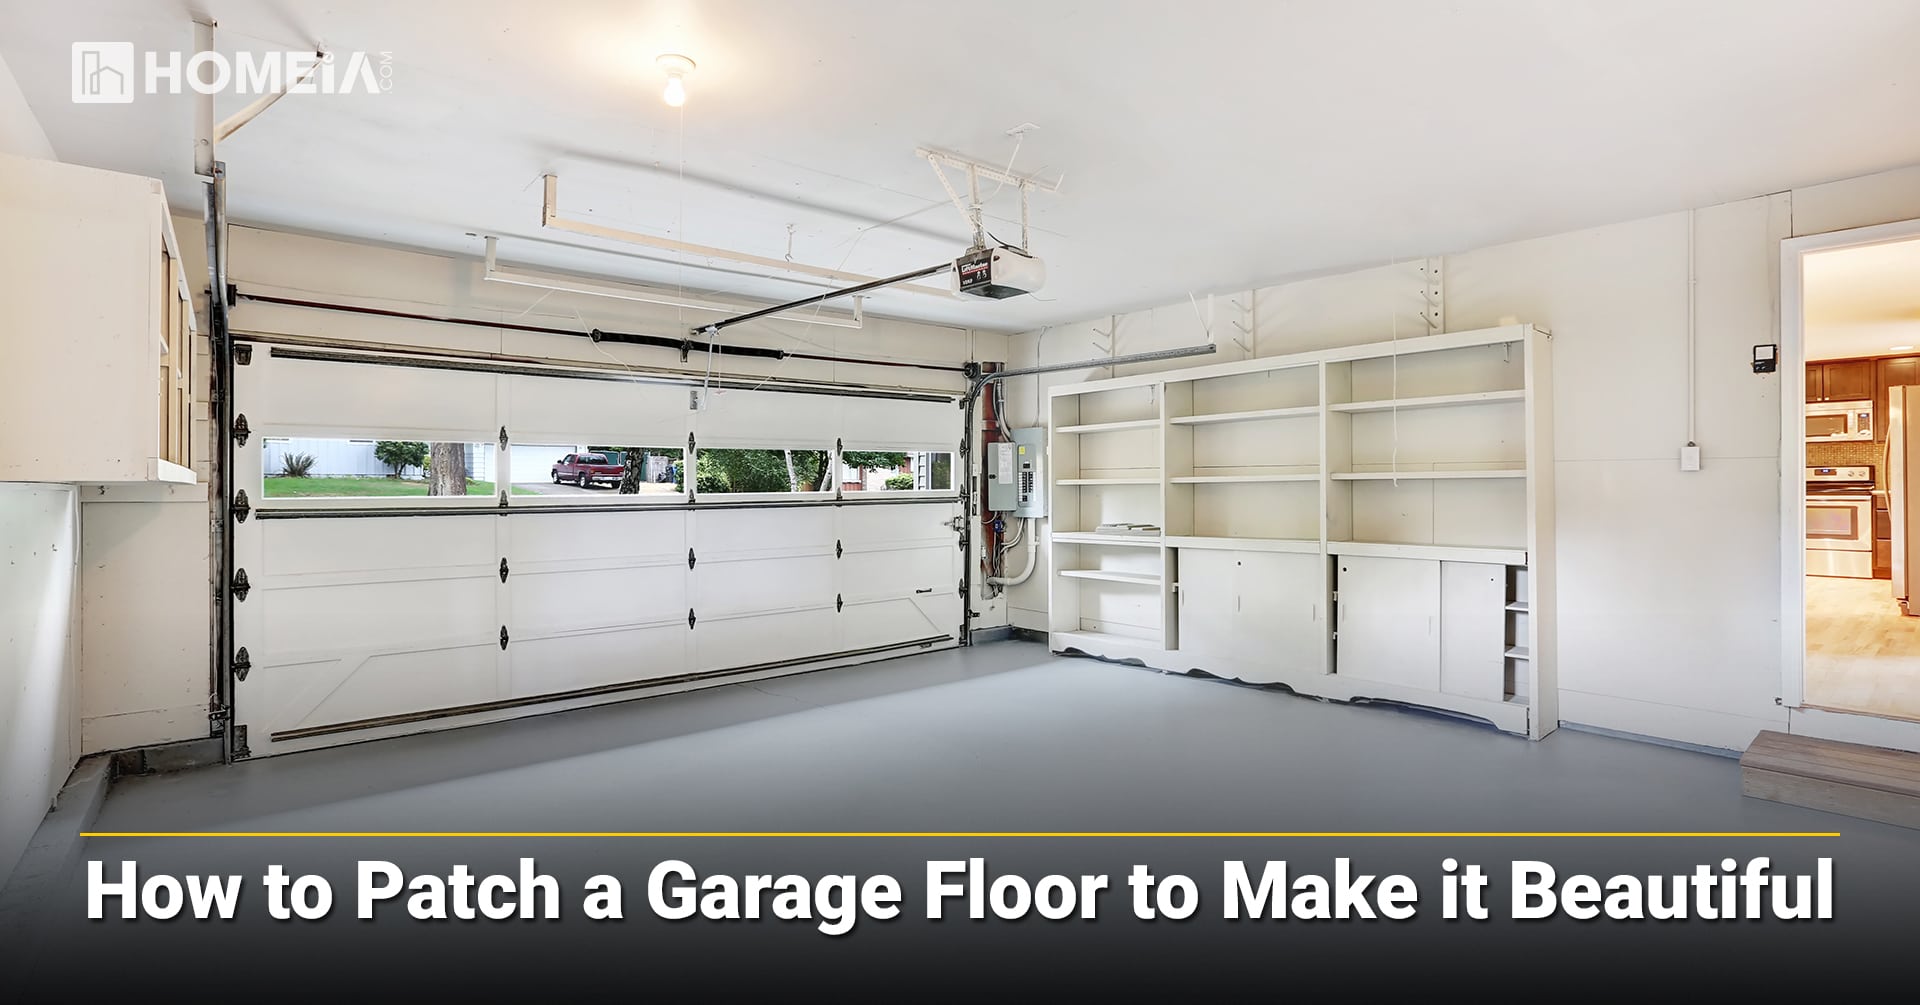 How to Patch a Garage Floor to Make it Beautiful